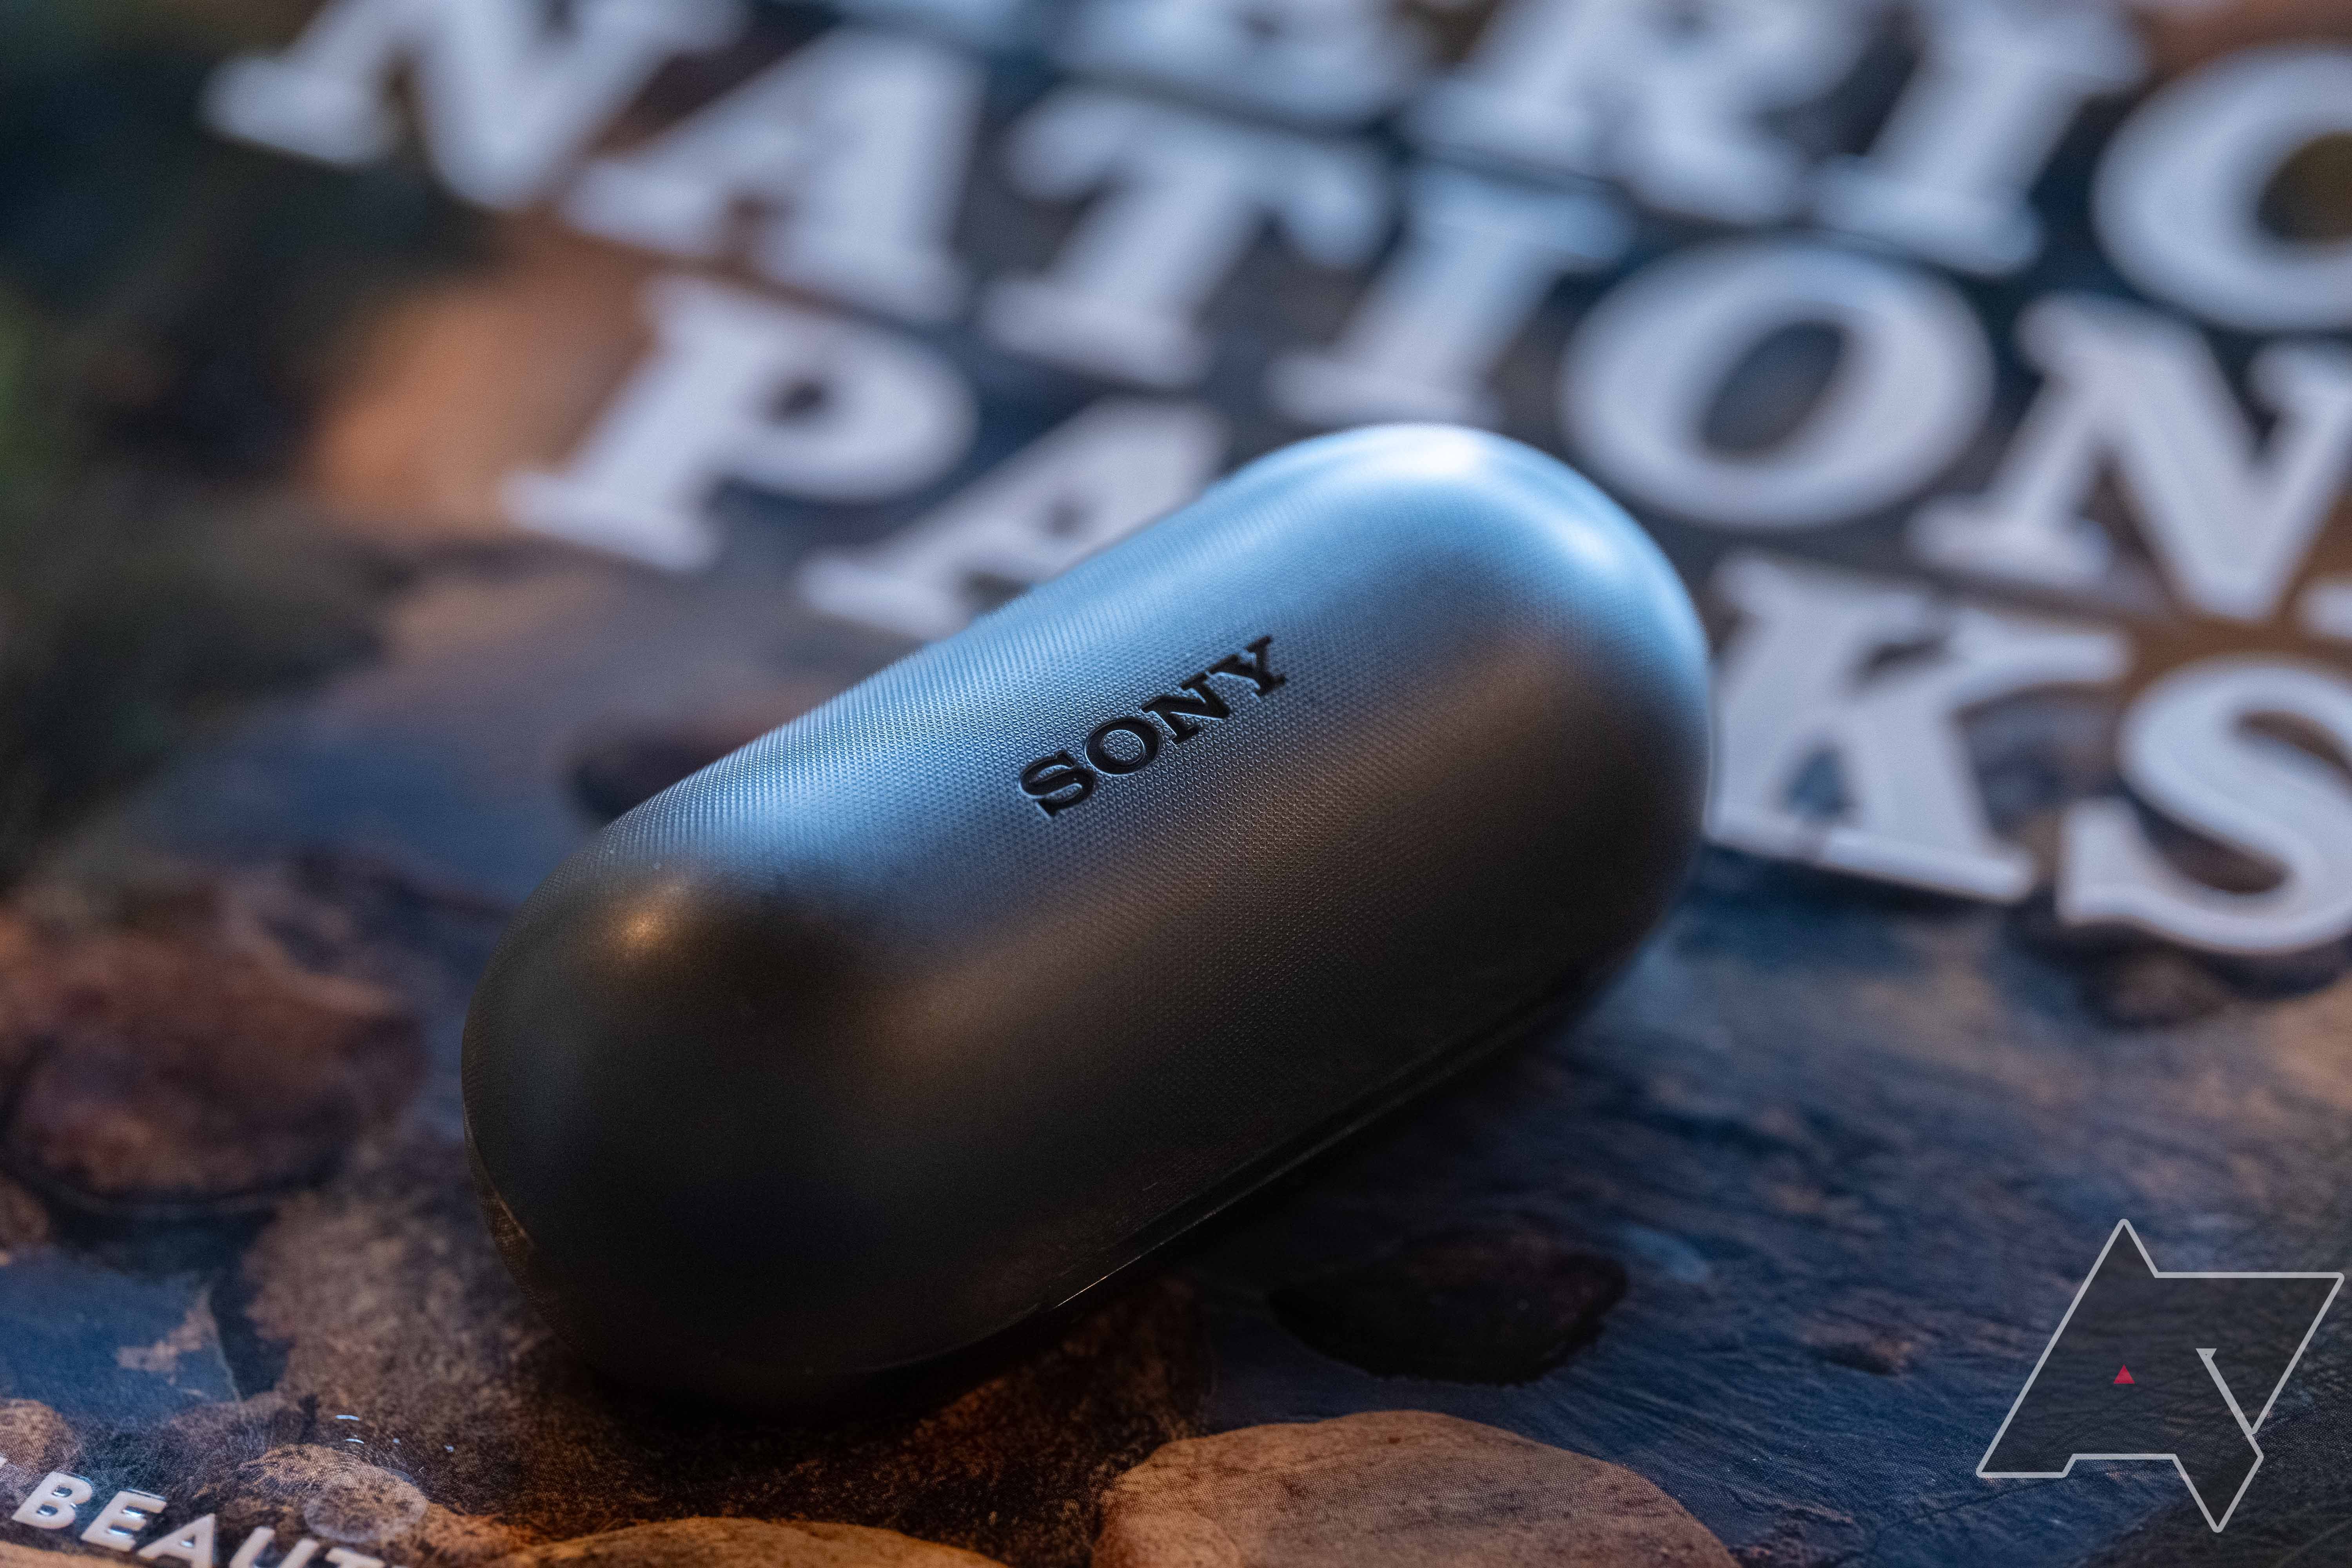 Sony WF-C700N review: comfort, ANC and sensational sound quality